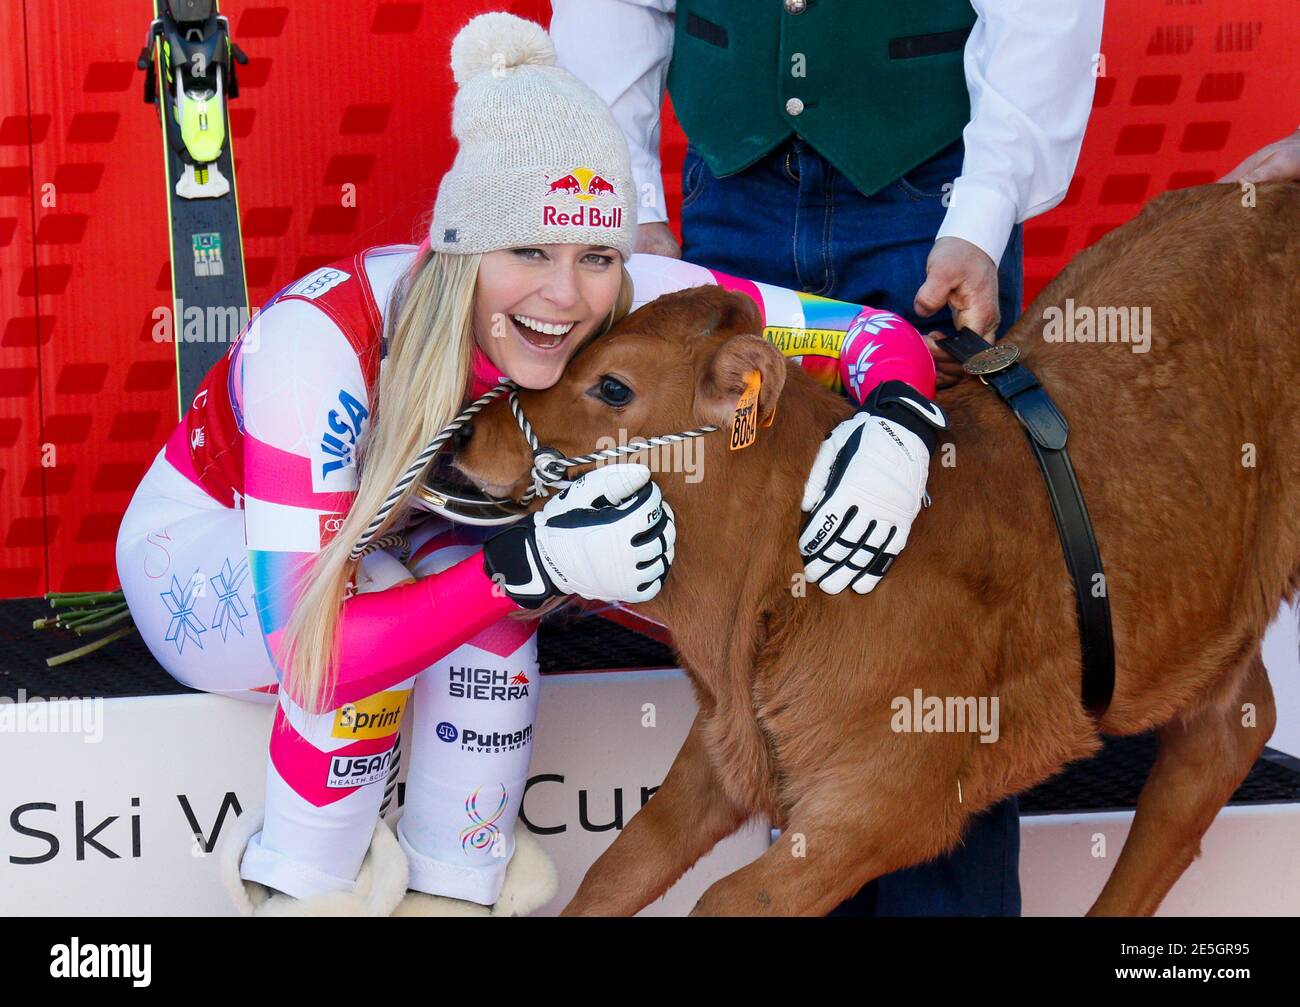 Lindsey Vonn of the U.S. poses for photographers with a cow she won as a prize after finishing first in the women's World Cup Downhill skiing race in Val d'Isere, French Alps, December 20, 2014.  REUTERS/Robert Pratta   (FRANCE - Tags: SPORT SKIING ANIMALS) Banque D'Images